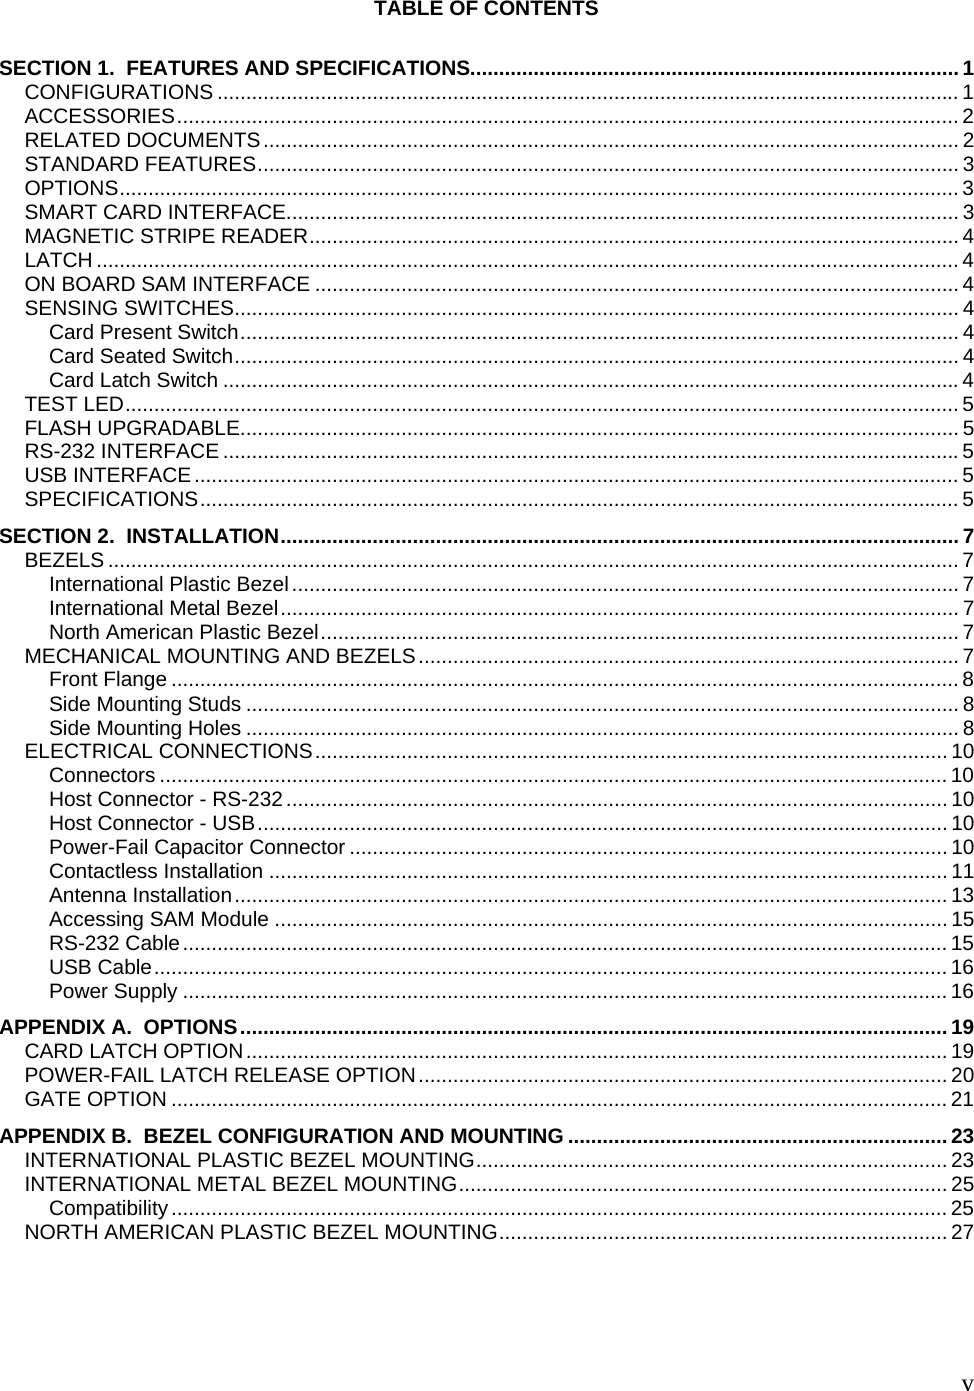   vTABLE OF CONTENTS  SECTION 1.  FEATURES AND SPECIFICATIONS..................................................................................... 1 CONFIGURATIONS ................................................................................................................................. 1 ACCESSORIES........................................................................................................................................ 2 RELATED DOCUMENTS......................................................................................................................... 2 STANDARD FEATURES.......................................................................................................................... 3 OPTIONS.................................................................................................................................................. 3 SMART CARD INTERFACE..................................................................................................................... 3 MAGNETIC STRIPE READER................................................................................................................. 4 LATCH ...................................................................................................................................................... 4 ON BOARD SAM INTERFACE ................................................................................................................ 4 SENSING SWITCHES.............................................................................................................................. 4 Card Present Switch............................................................................................................................. 4 Card Seated Switch.............................................................................................................................. 4 Card Latch Switch ................................................................................................................................4 TEST LED................................................................................................................................................. 5 FLASH UPGRADABLE............................................................................................................................. 5 RS-232 INTERFACE ................................................................................................................................5 USB INTERFACE..................................................................................................................................... 5 SPECIFICATIONS.................................................................................................................................... 5 SECTION 2.  INSTALLATION...................................................................................................................... 7 BEZELS .................................................................................................................................................... 7 International Plastic Bezel.................................................................................................................... 7 International Metal Bezel...................................................................................................................... 7 North American Plastic Bezel............................................................................................................... 7 MECHANICAL MOUNTING AND BEZELS.............................................................................................. 7 Front Flange ......................................................................................................................................... 8 Side Mounting Studs ............................................................................................................................ 8 Side Mounting Holes ............................................................................................................................ 8 ELECTRICAL CONNECTIONS.............................................................................................................. 10 Connectors ......................................................................................................................................... 10 Host Connector - RS-232................................................................................................................... 10 Host Connector - USB........................................................................................................................ 10 Power-Fail Capacitor Connector ........................................................................................................ 10 Contactless Installation ...................................................................................................................... 11 Antenna Installation............................................................................................................................ 13 Accessing SAM Module ..................................................................................................................... 15 RS-232 Cable..................................................................................................................................... 15 USB Cable.......................................................................................................................................... 16 Power Supply ..................................................................................................................................... 16 APPENDIX A.  OPTIONS........................................................................................................................... 19 CARD LATCH OPTION.......................................................................................................................... 19 POWER-FAIL LATCH RELEASE OPTION............................................................................................ 20 GATE OPTION ....................................................................................................................................... 21 APPENDIX B.  BEZEL CONFIGURATION AND MOUNTING .................................................................. 23 INTERNATIONAL PLASTIC BEZEL MOUNTING.................................................................................. 23 INTERNATIONAL METAL BEZEL MOUNTING..................................................................................... 25 Compatibility....................................................................................................................................... 25 NORTH AMERICAN PLASTIC BEZEL MOUNTING.............................................................................. 27  